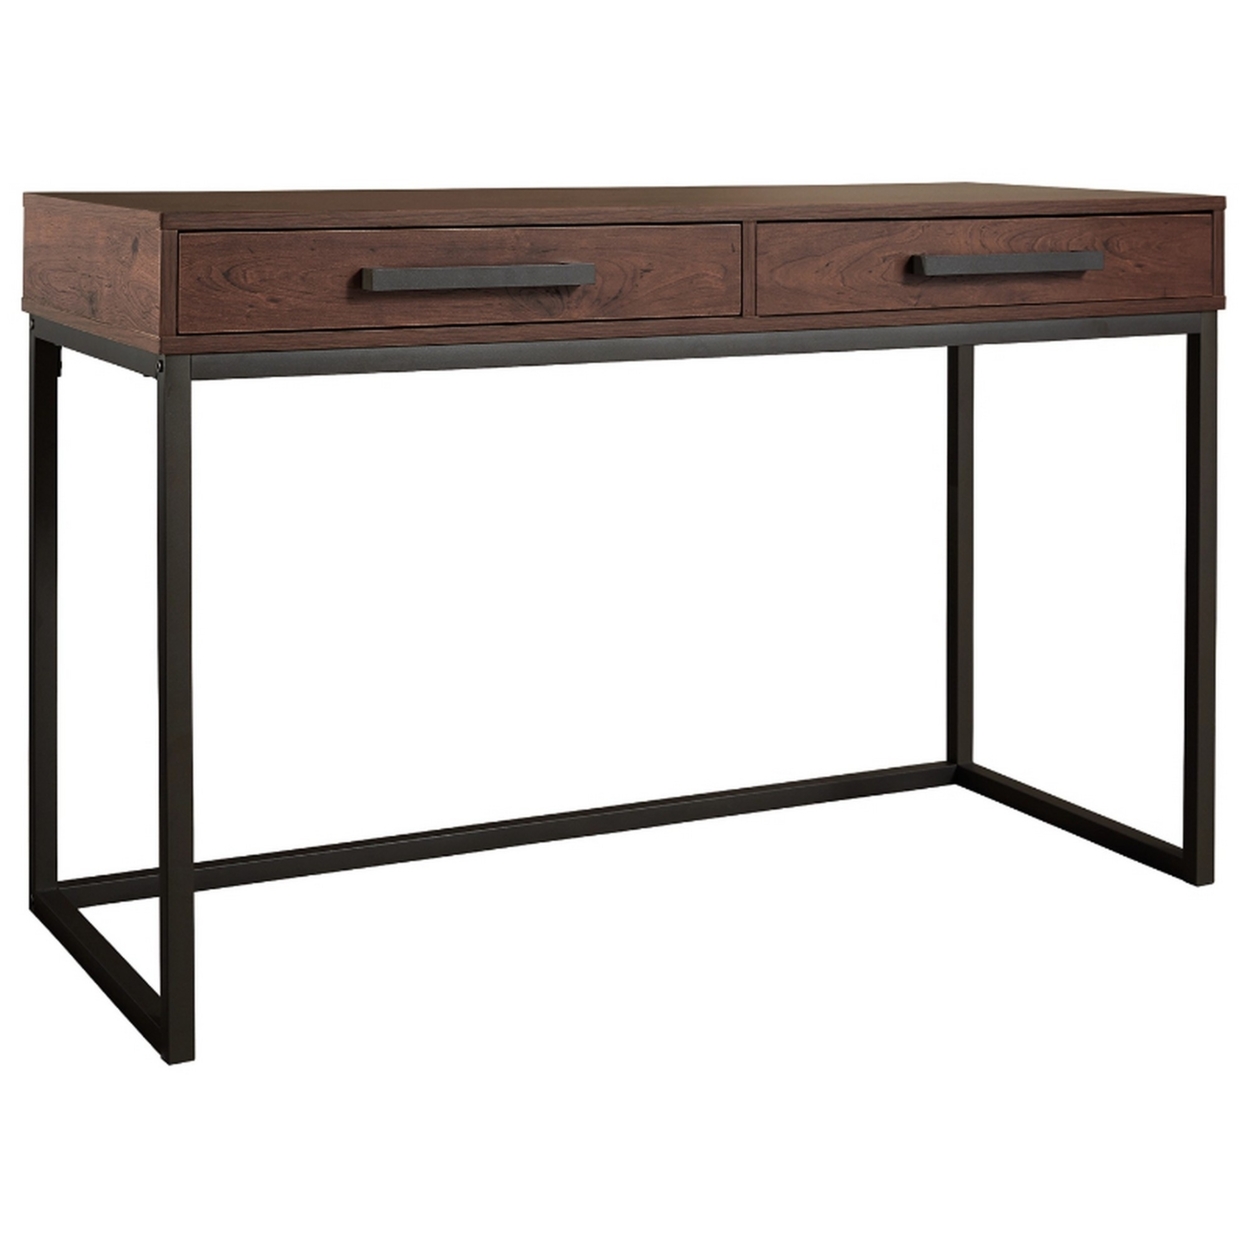 Office Desk With 2 Drawers And Metal Sled Base, Brown And Gray- Saltoro Sherpi